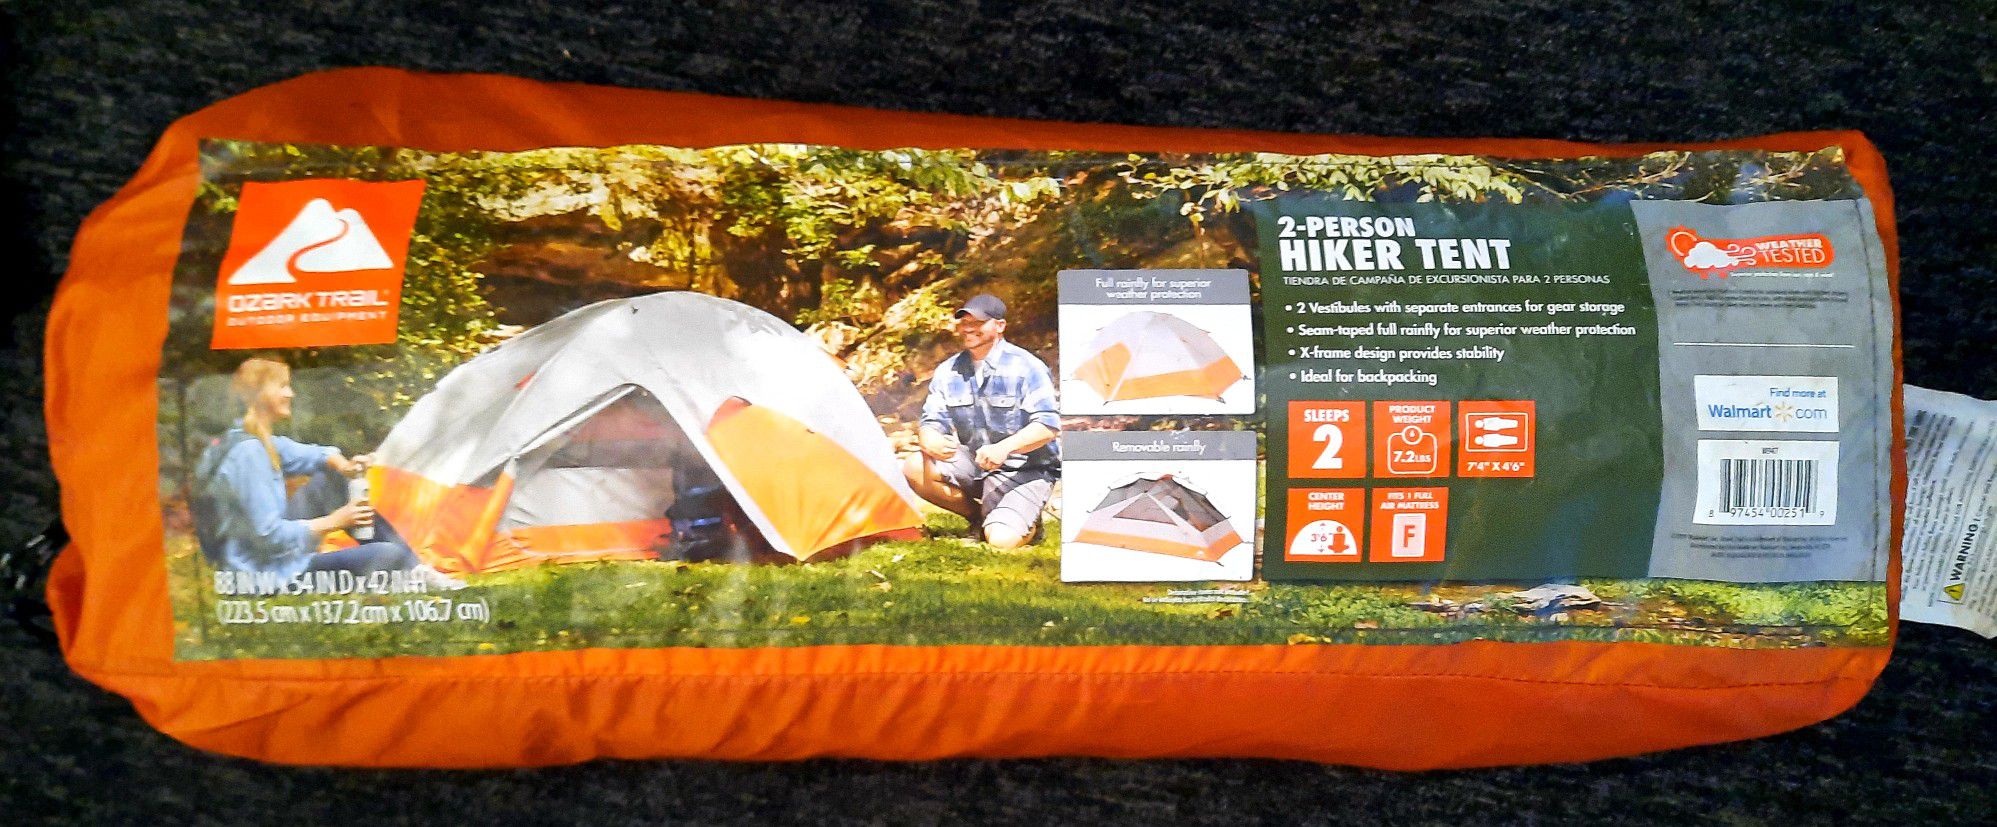 Ozark Trail 2-Person Backpacking Tent